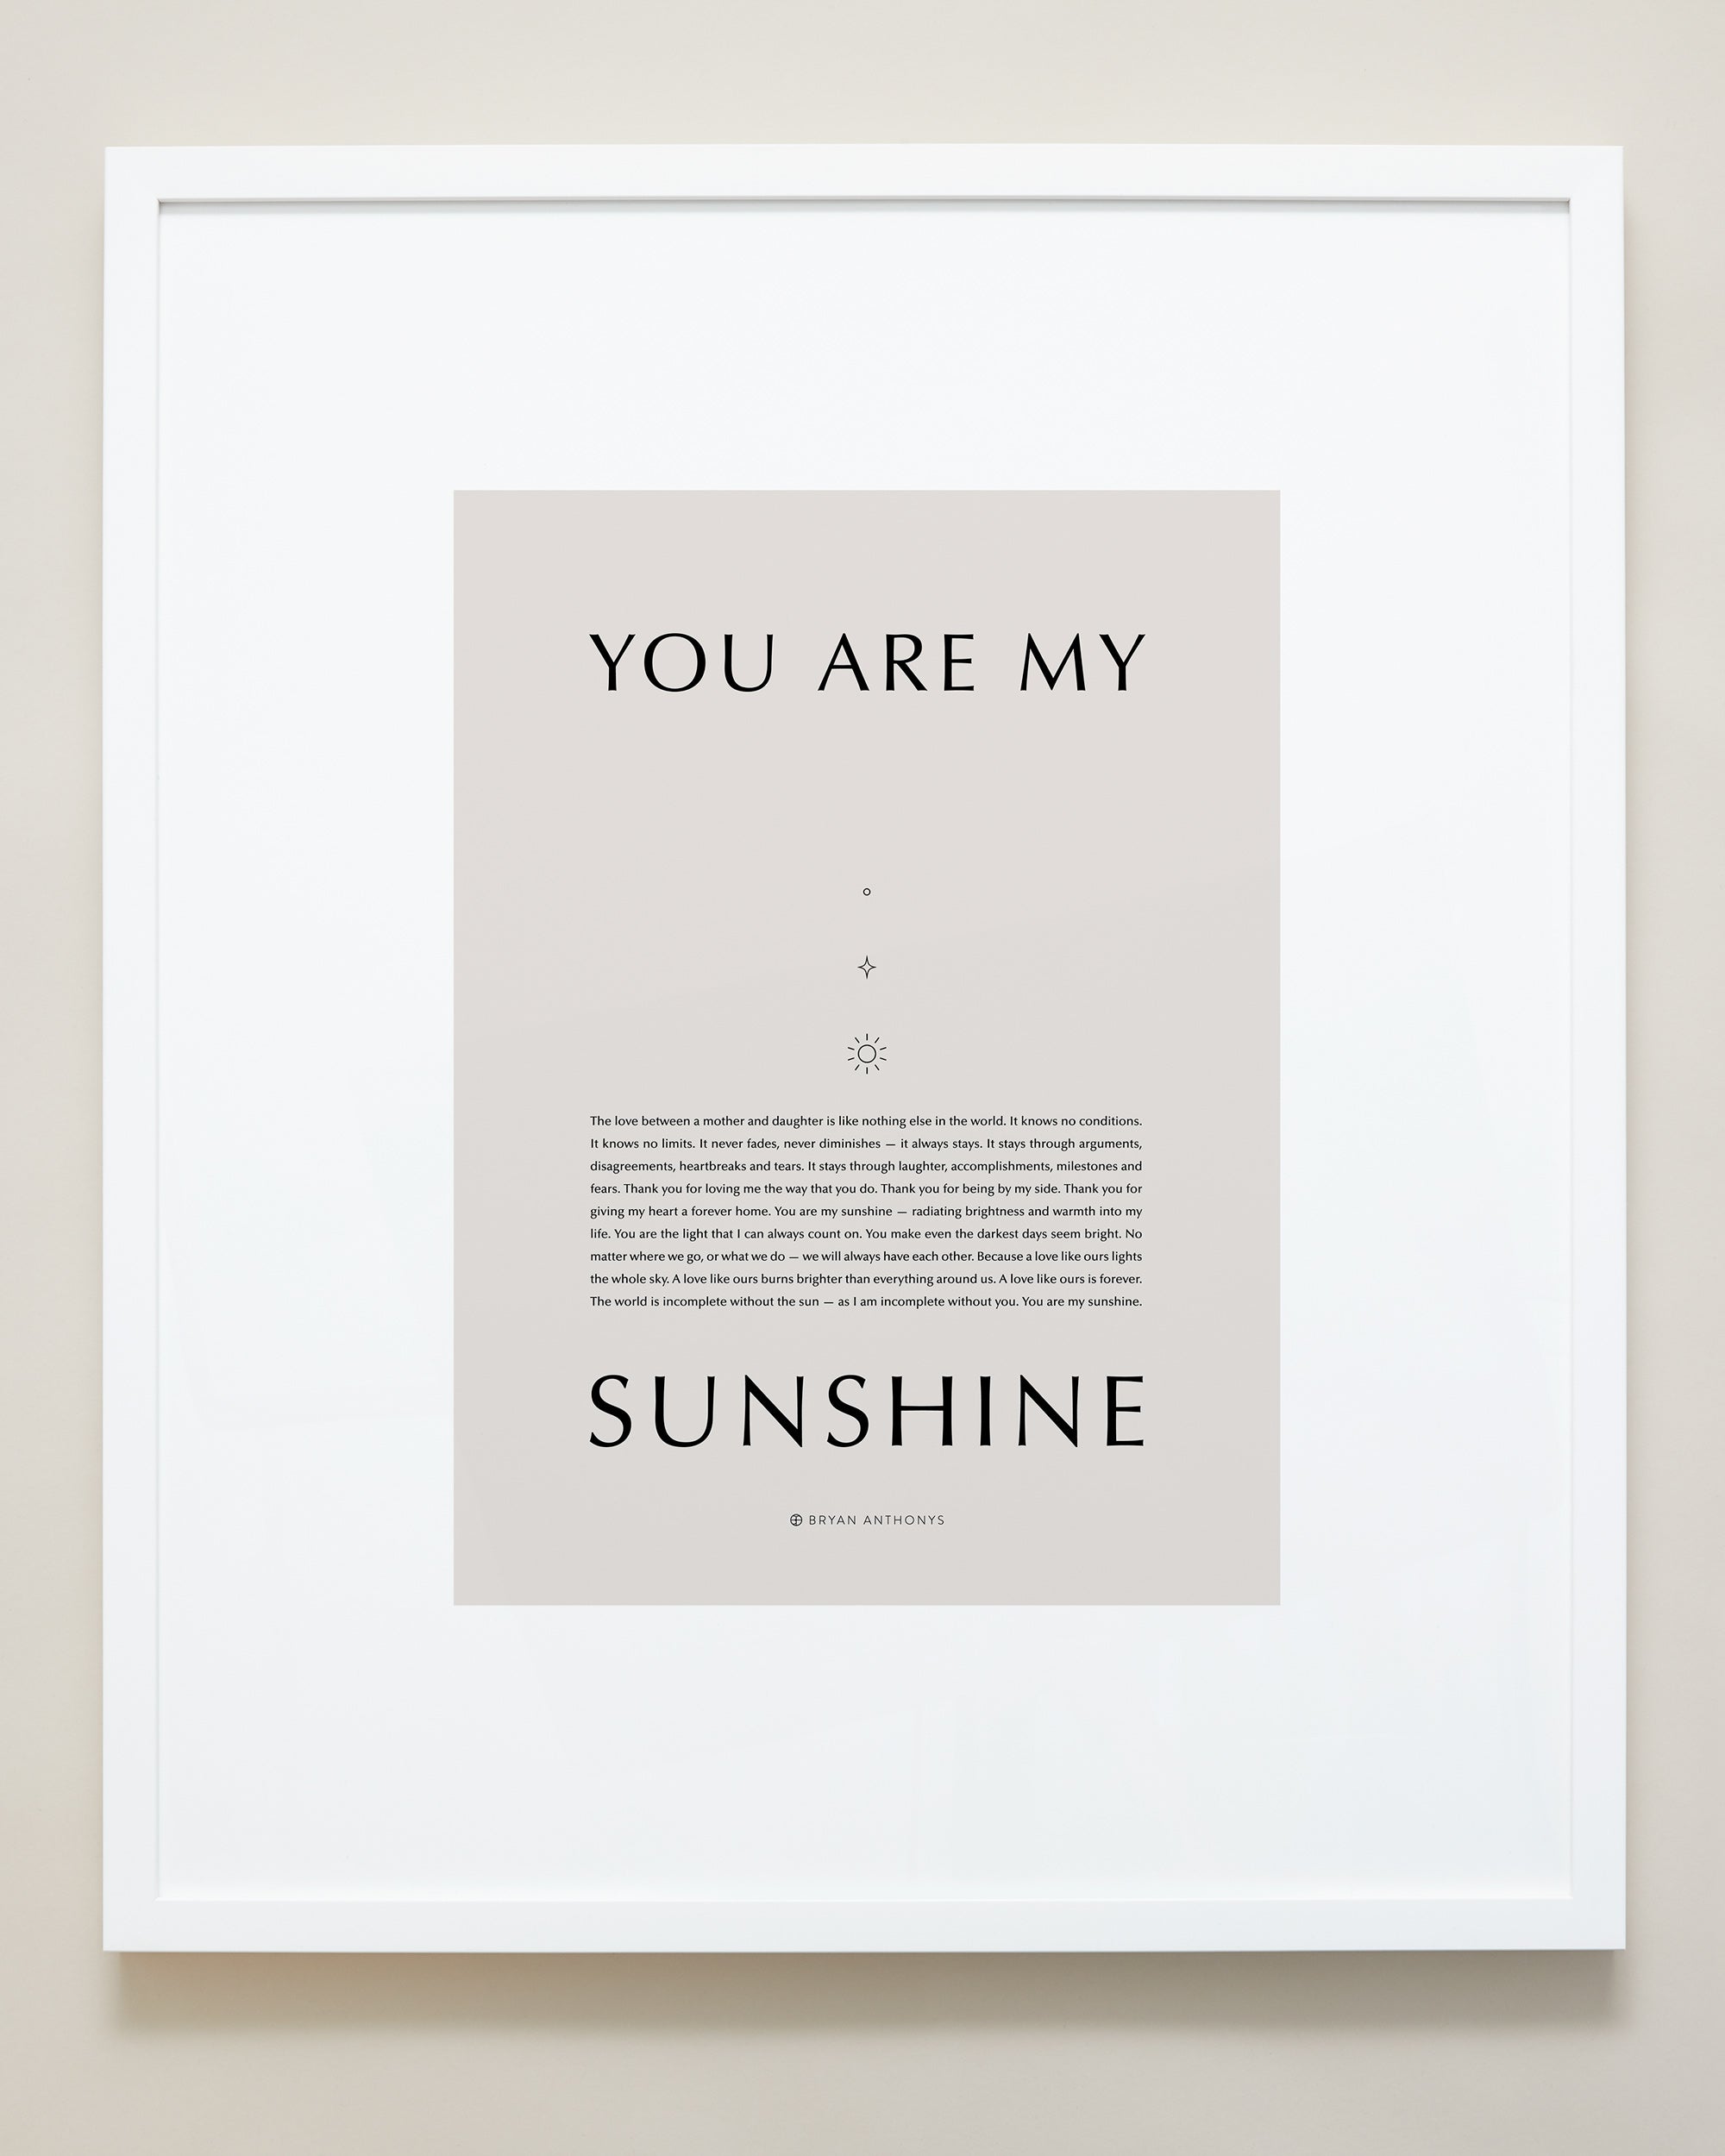 Bryan Anthonys Home Decor Purposeful Prints You Are My Sunshine Iconic Framed Print Tan Art With White Frame 20x24